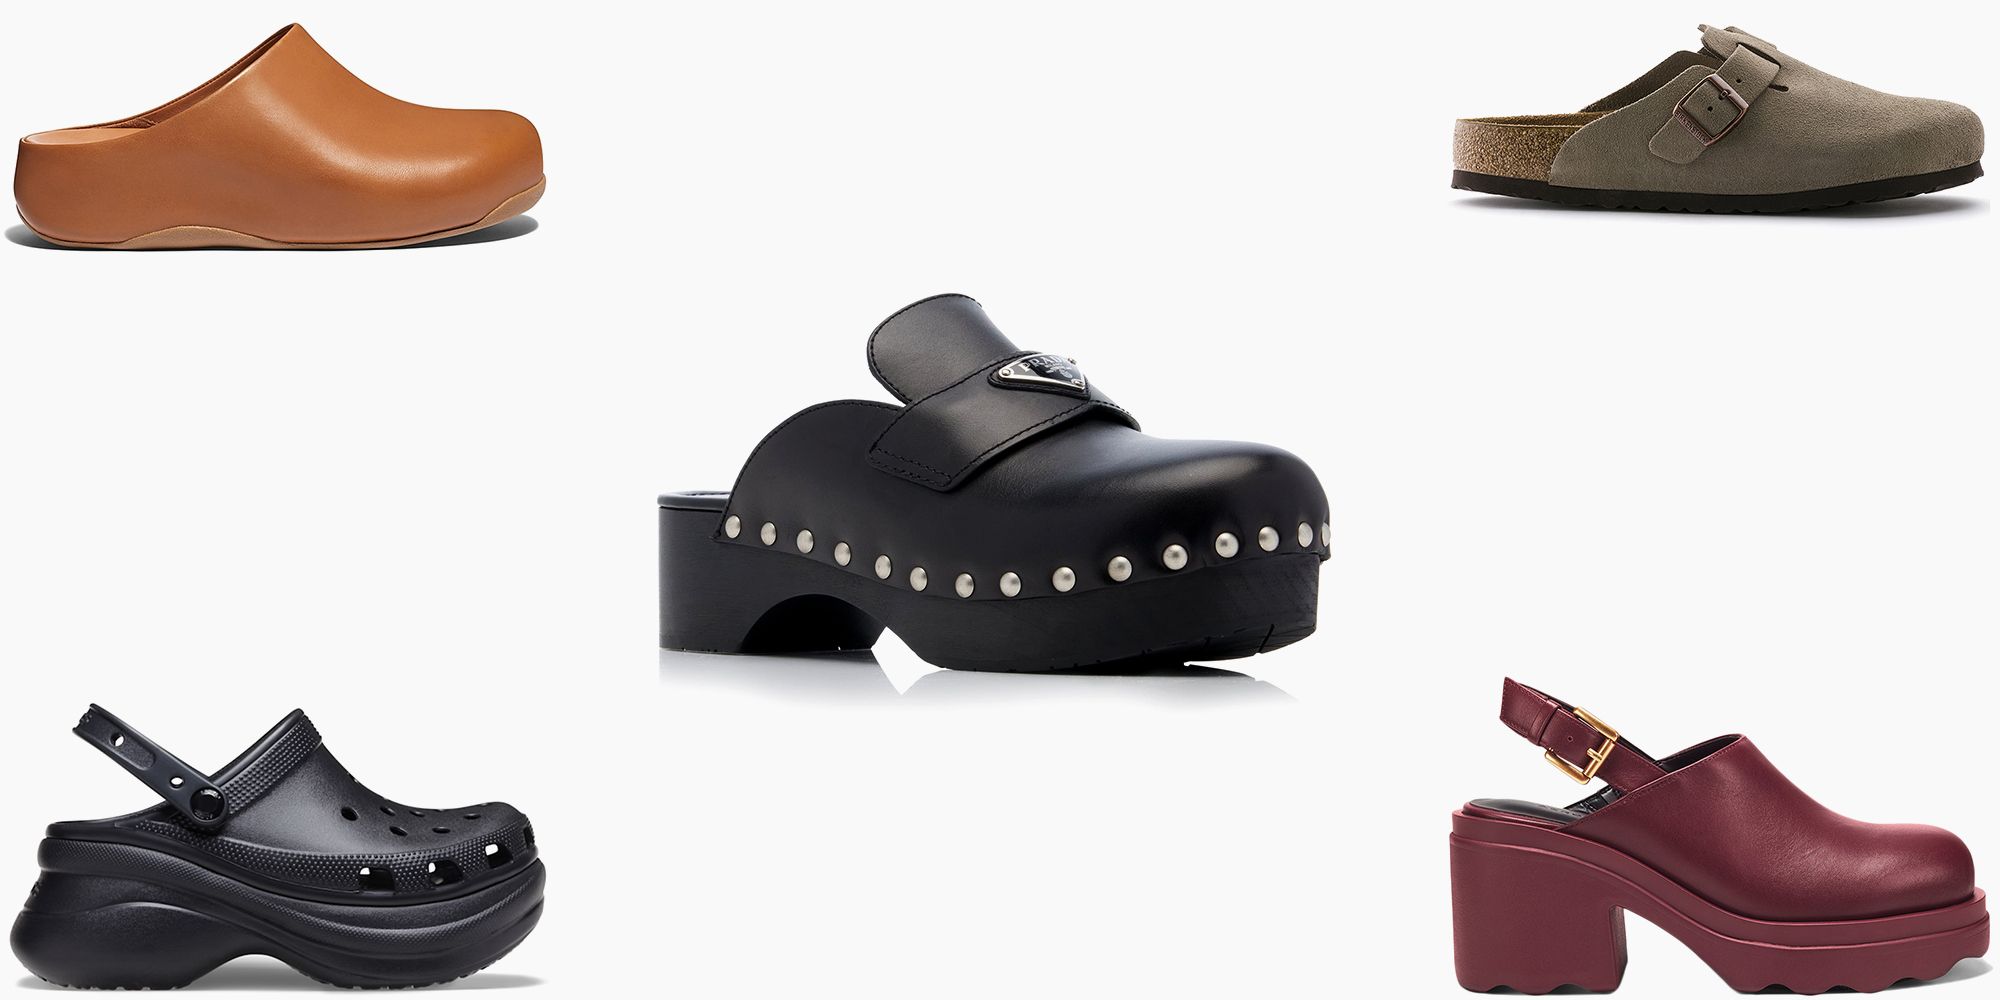 Best Clogs For Women 2023: The Best Women's Clogs To Buy Now